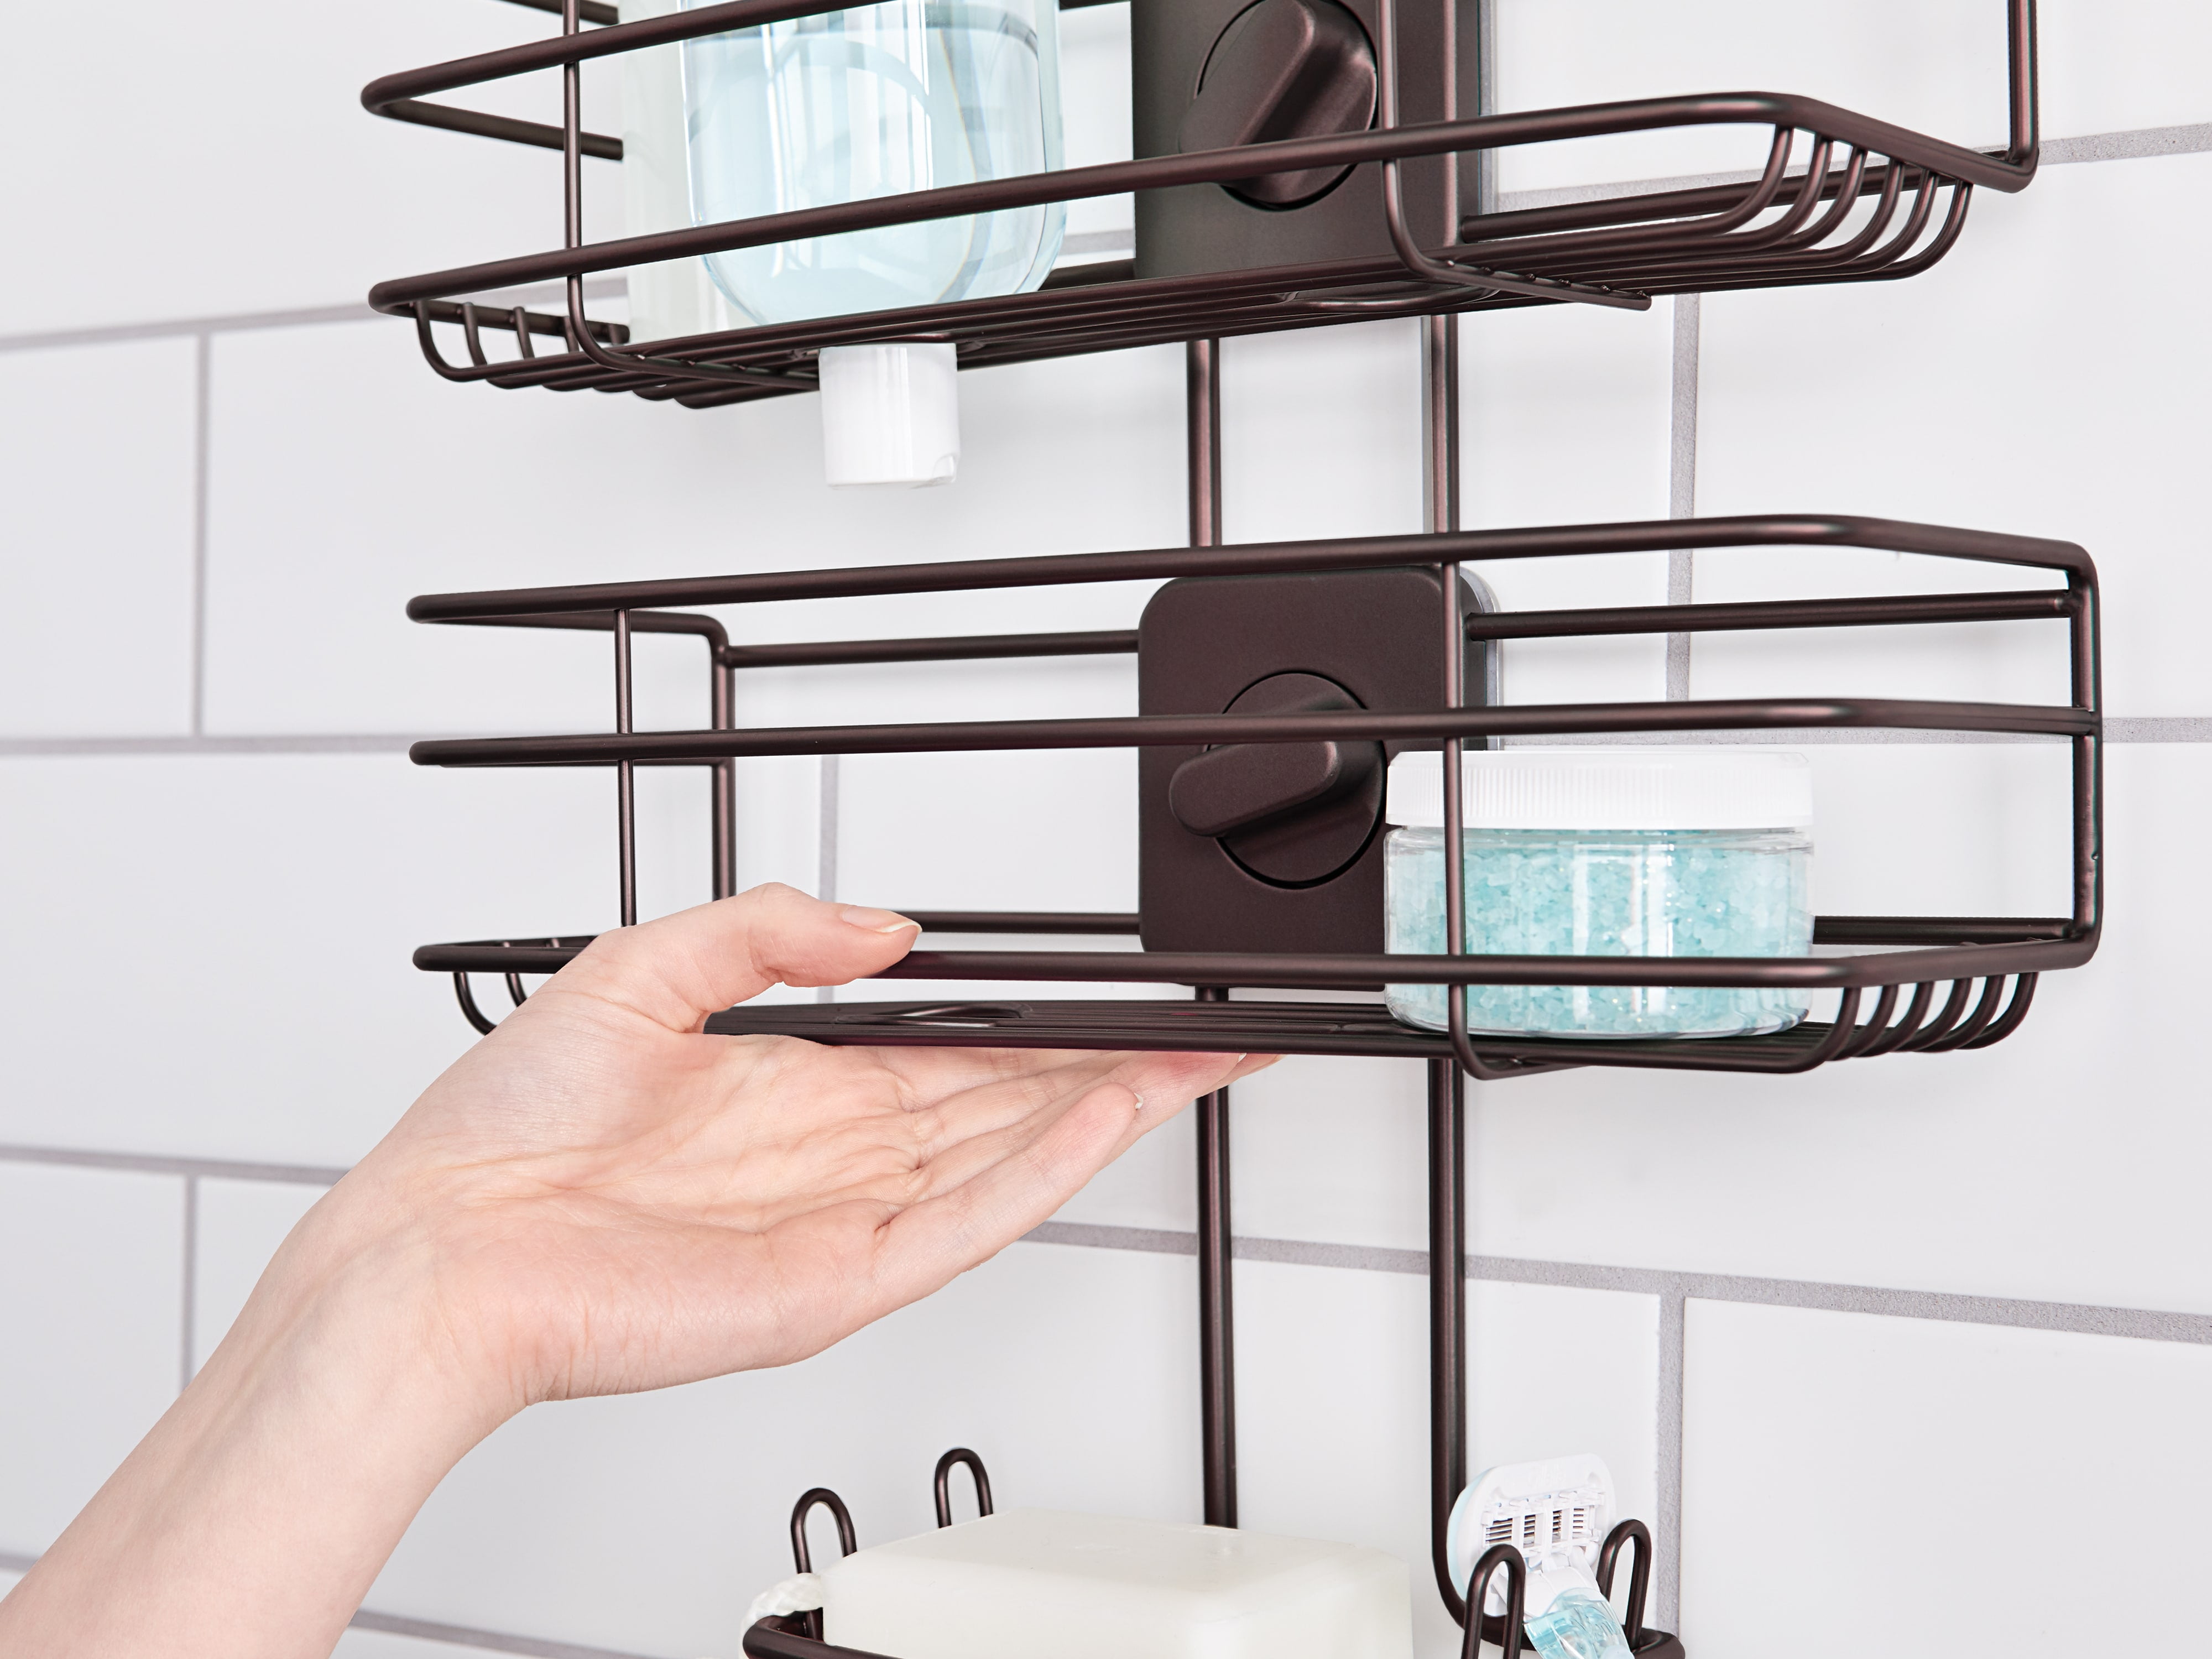 with exclusive discounts Dracelo Bronze Shower Caddy over Shower